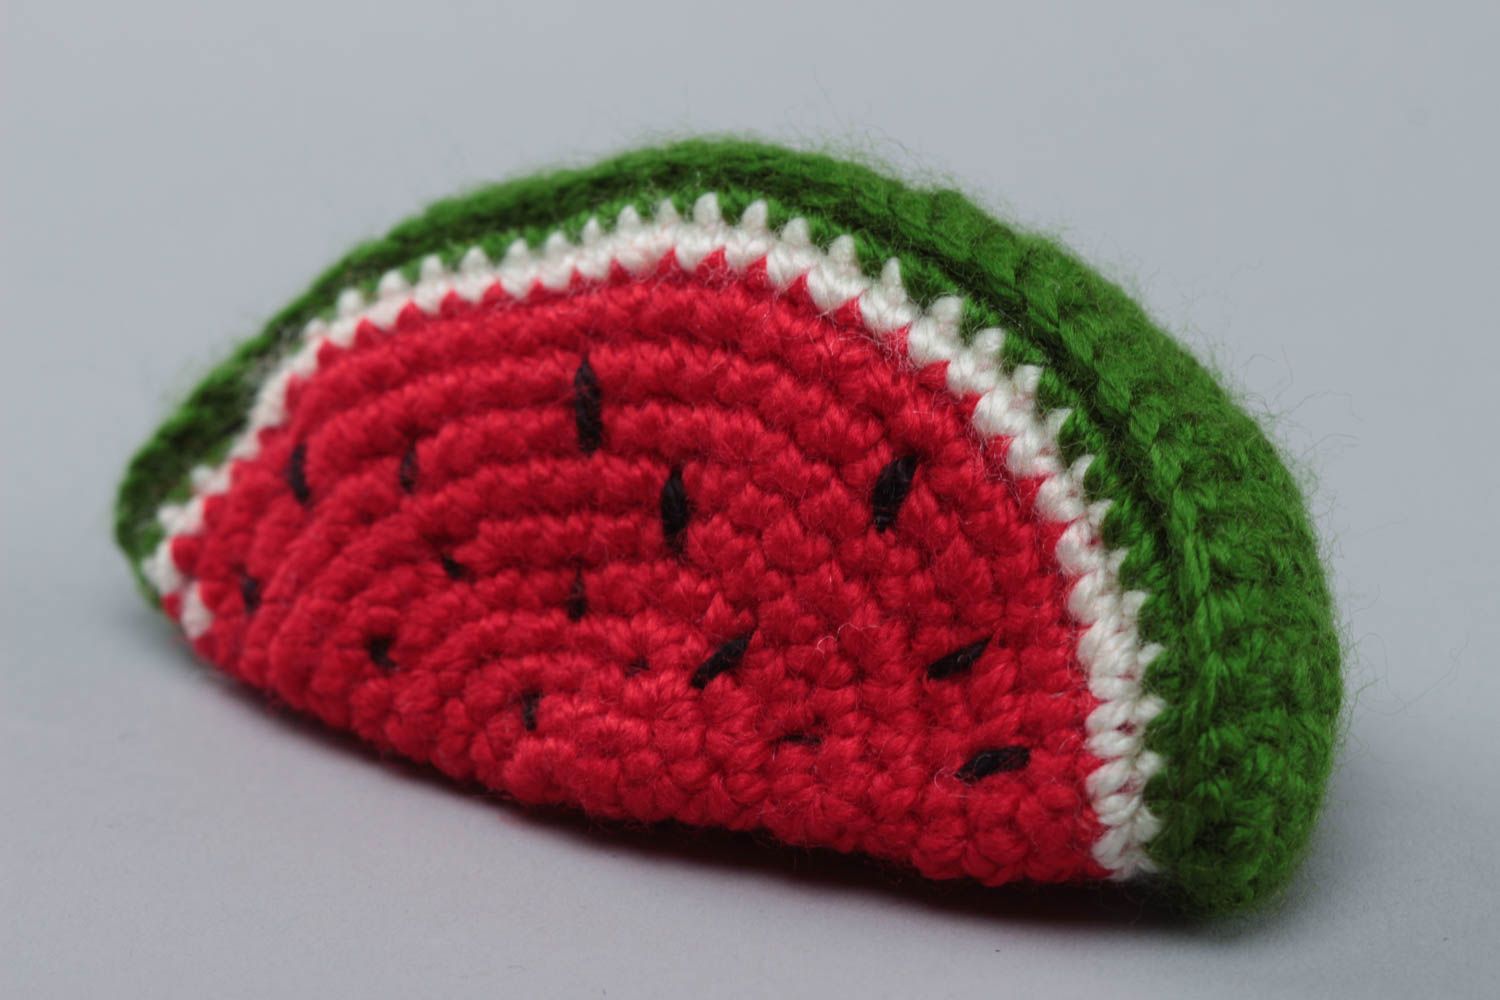 Handmade small crochet soft toy water melon slice for kids and interior decor photo 2